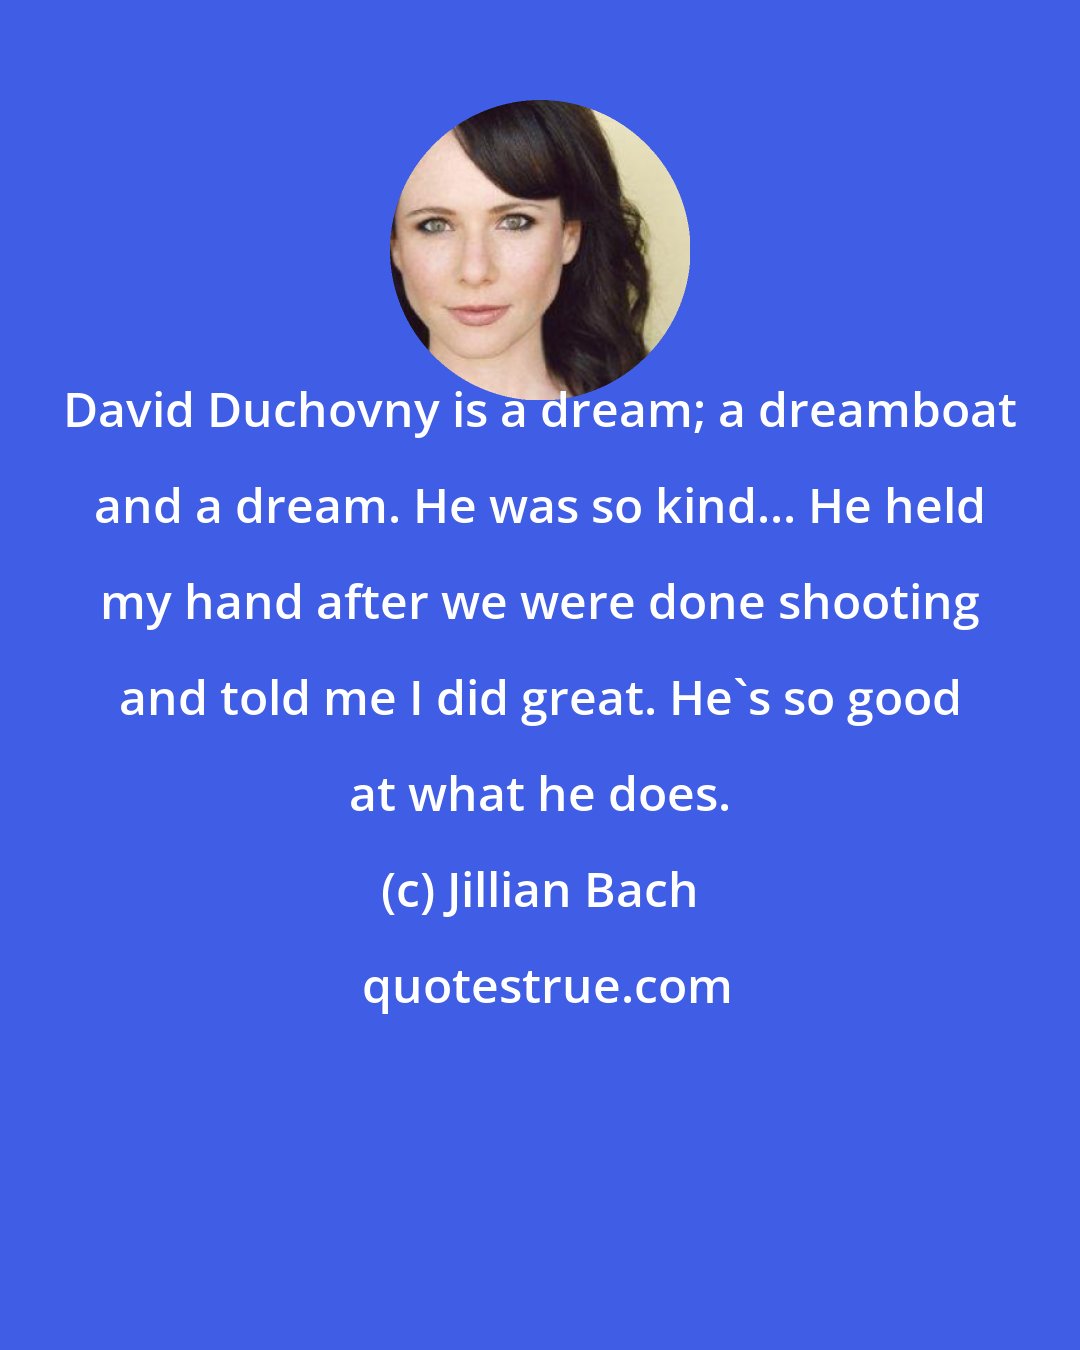 Jillian Bach: David Duchovny is a dream; a dreamboat and a dream. He was so kind... He held my hand after we were done shooting and told me I did great. He's so good at what he does.